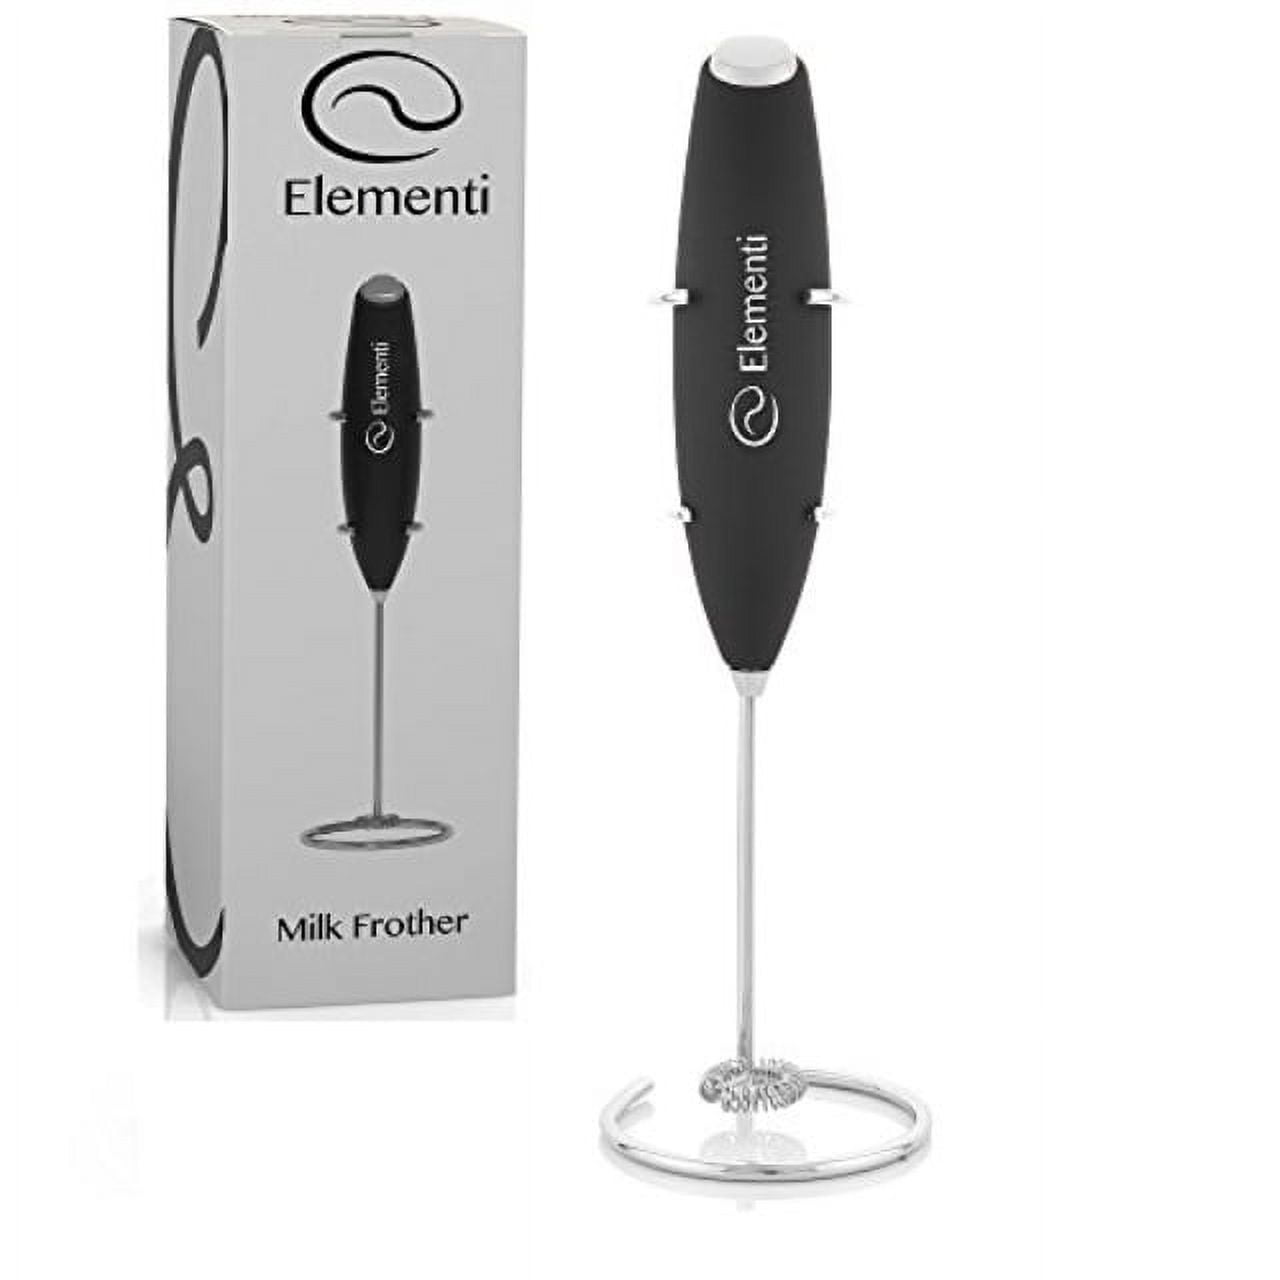 Elementi Electric Milk Frother Handheld, Matcha Whisk, Milk Frother for Coffee Frother Electric Handheld Drink Mixer, Electric Mini Whisk Small Hand